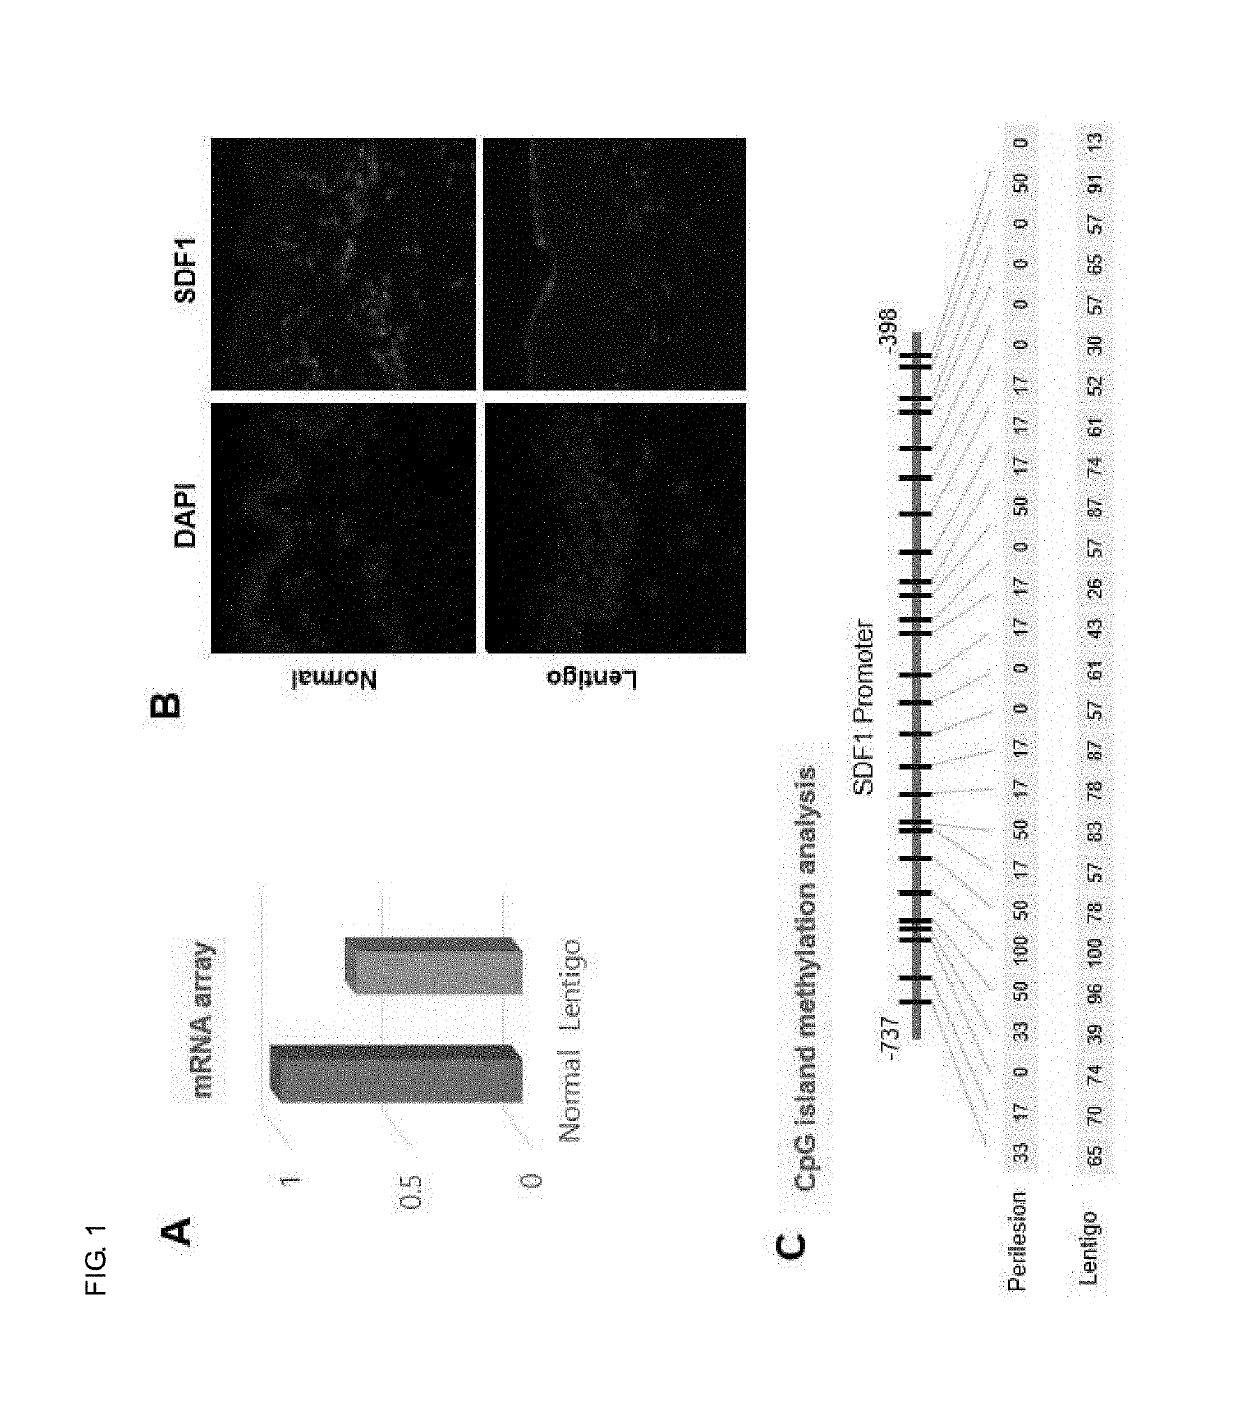 Composition for regulating cutaneous pigmentation or skin whitening comprising sdf1